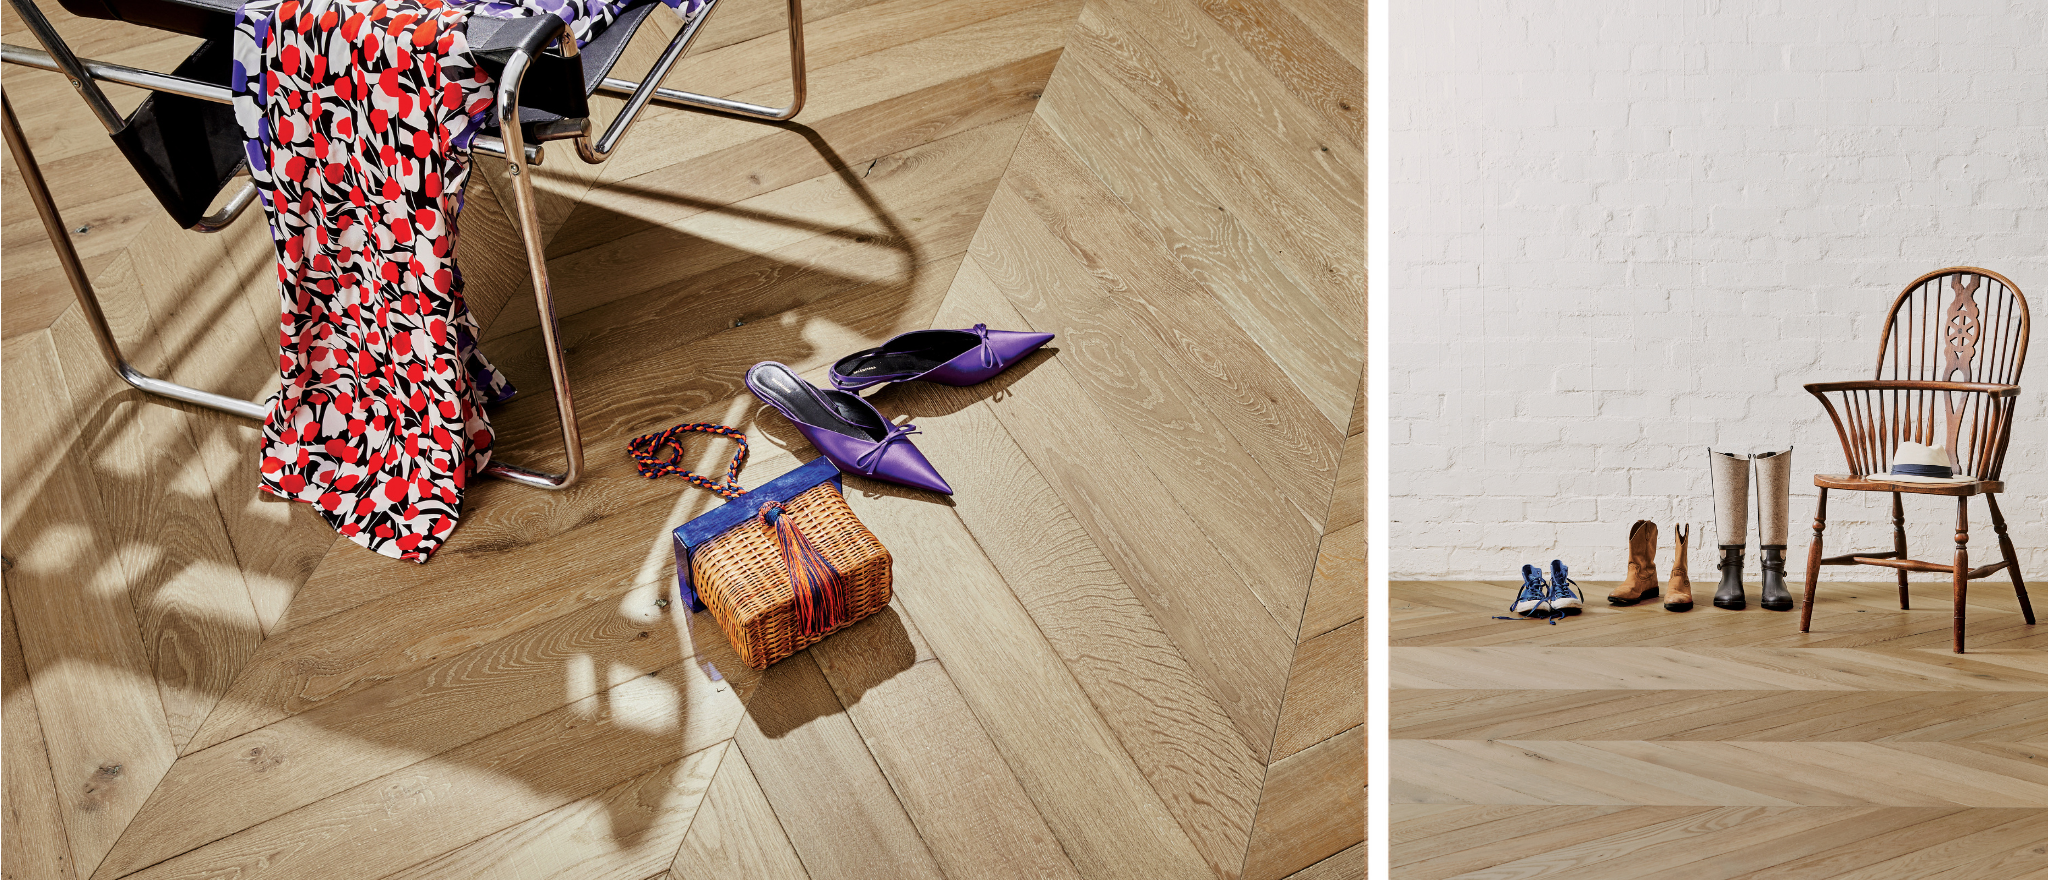 SOLLE Linseed engineered timber flooring , with women's clothing, a bag and a some purple shoes